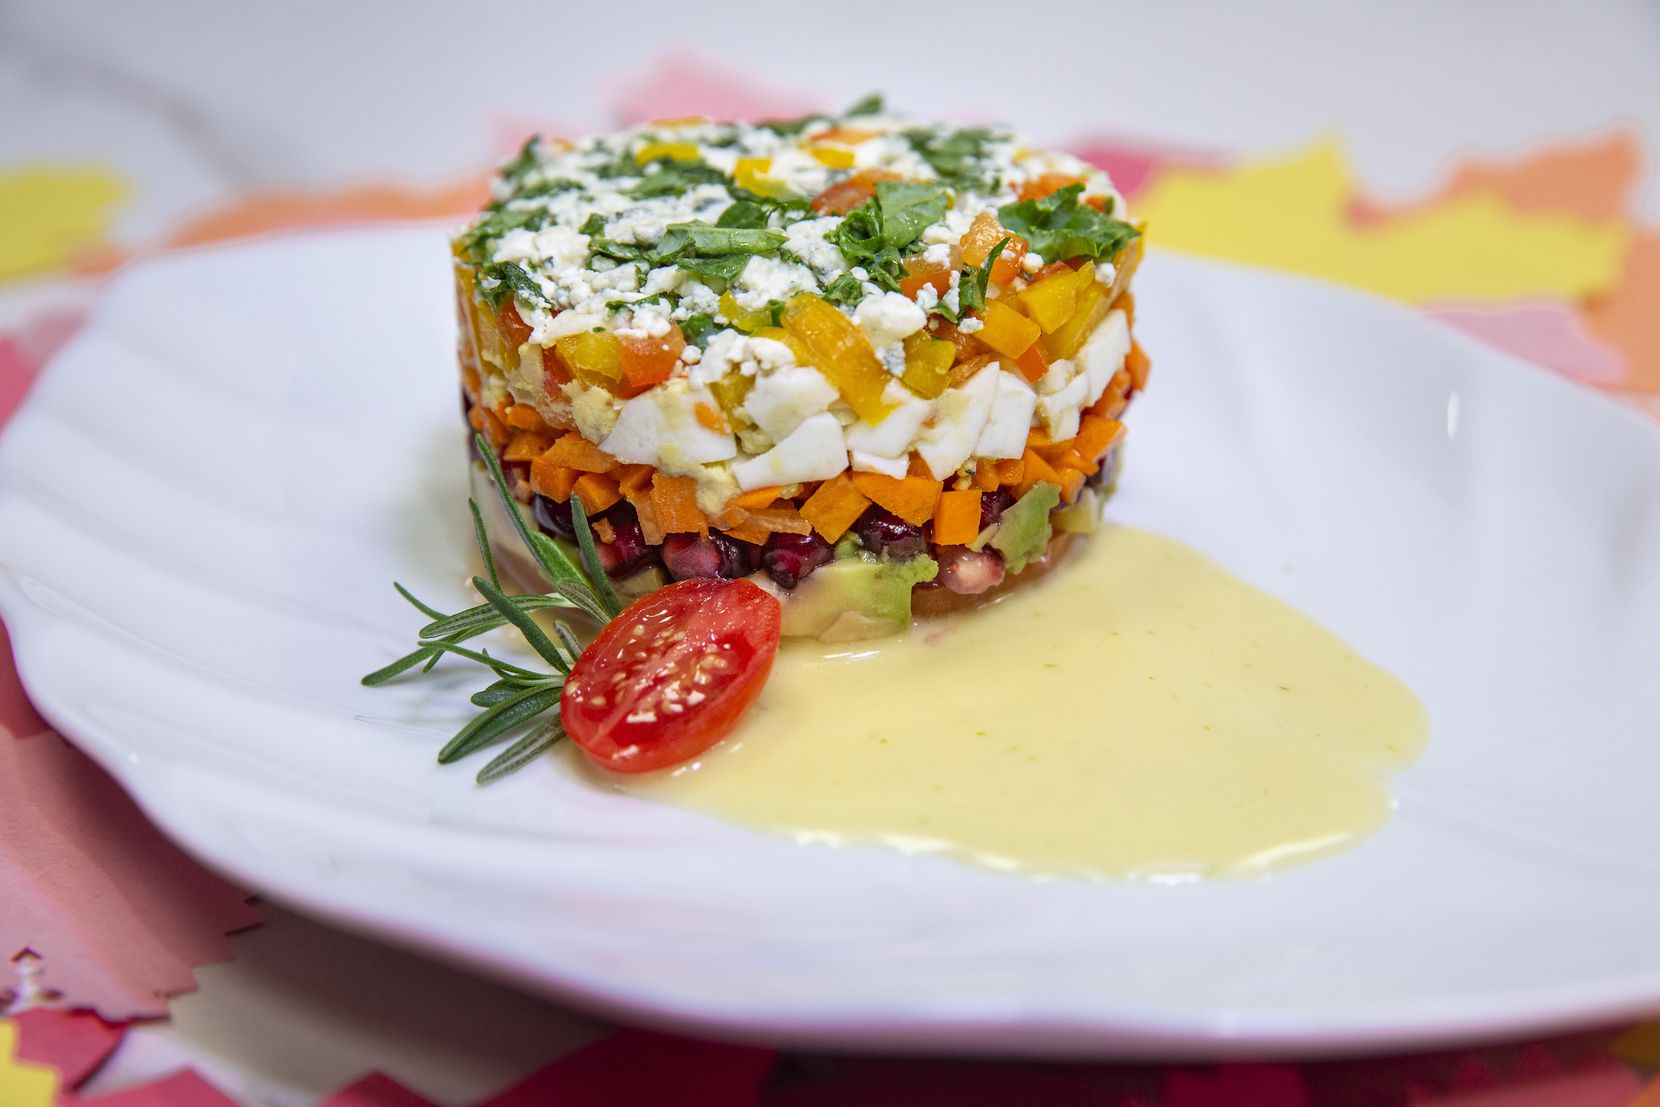 The Chopped Stack Salad is plated on a Citrus Vinaigrette and features heirloom tomatoes,...